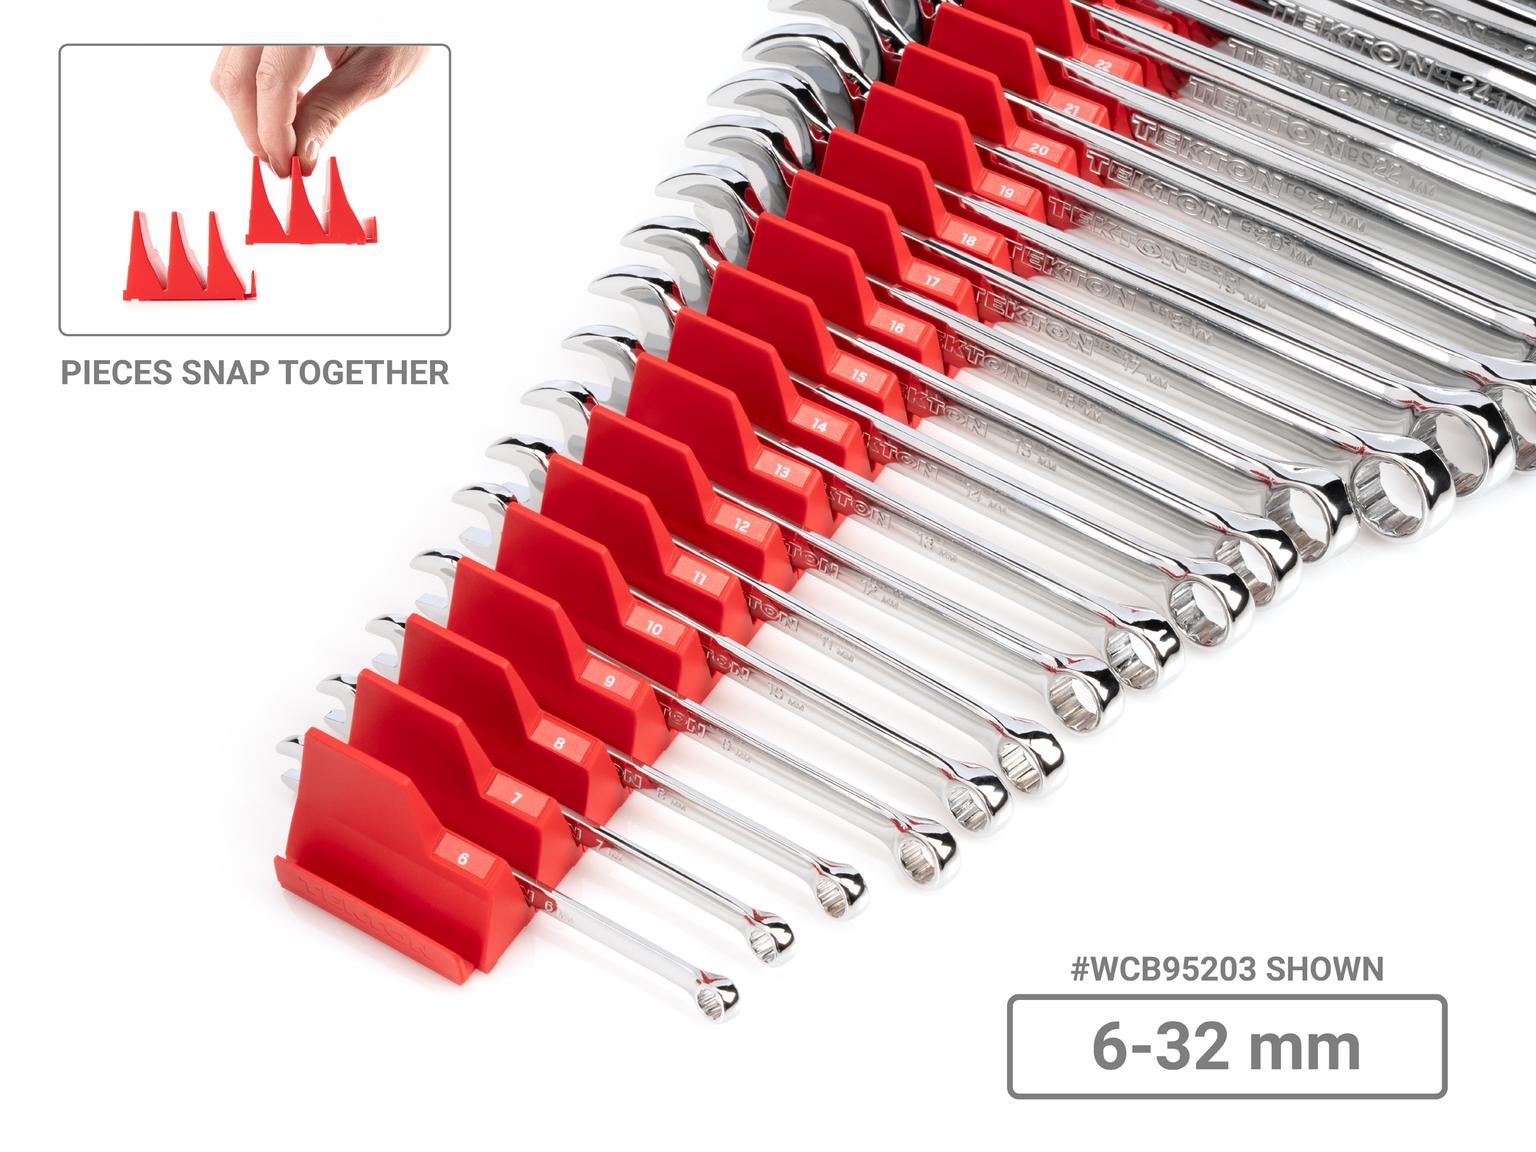 TEKTON WCB95202-T Combination Wrench Set with Modular Slotted Organizer, 19-Piece (6 - 24 mm)